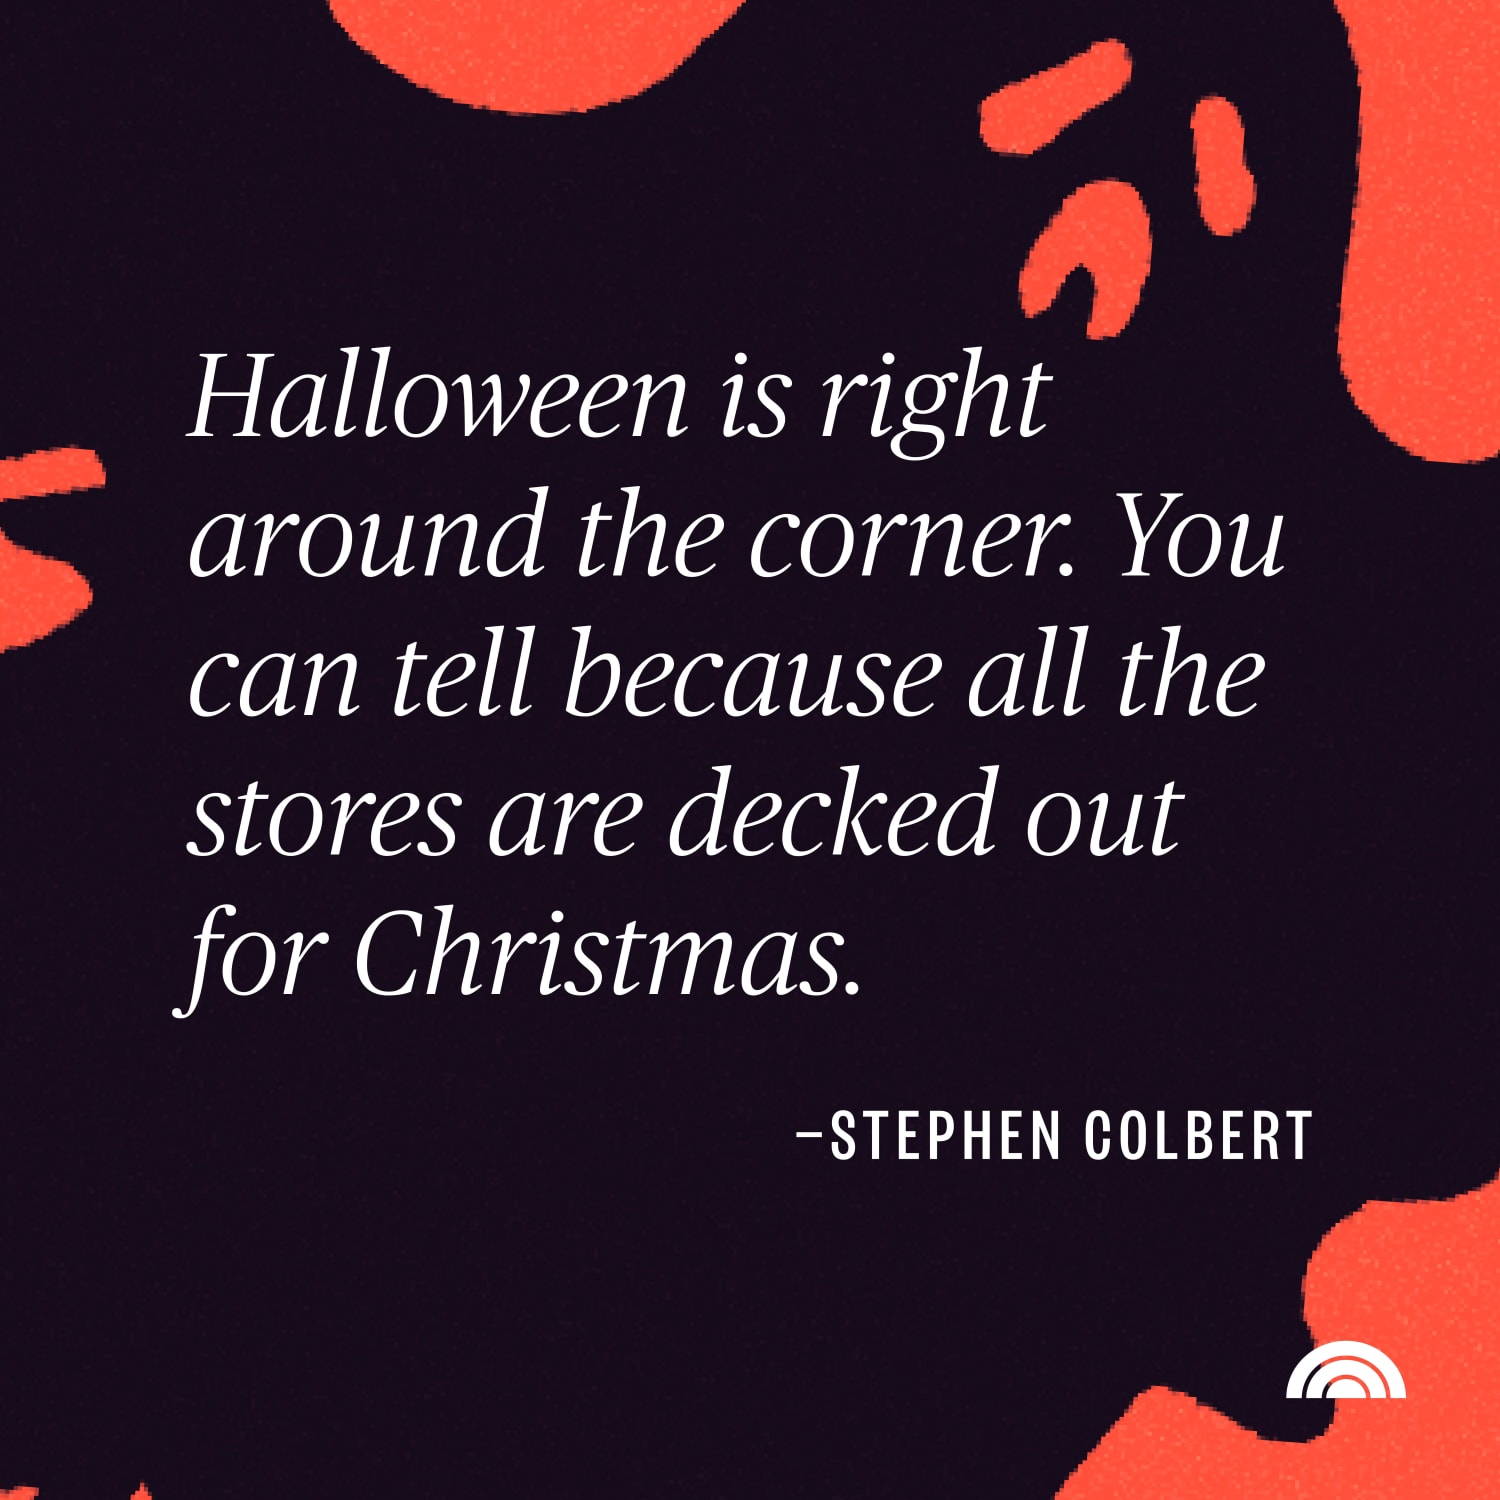 75 Funny Halloween Quotes - Short and Silly Halloween Quotes From Movies